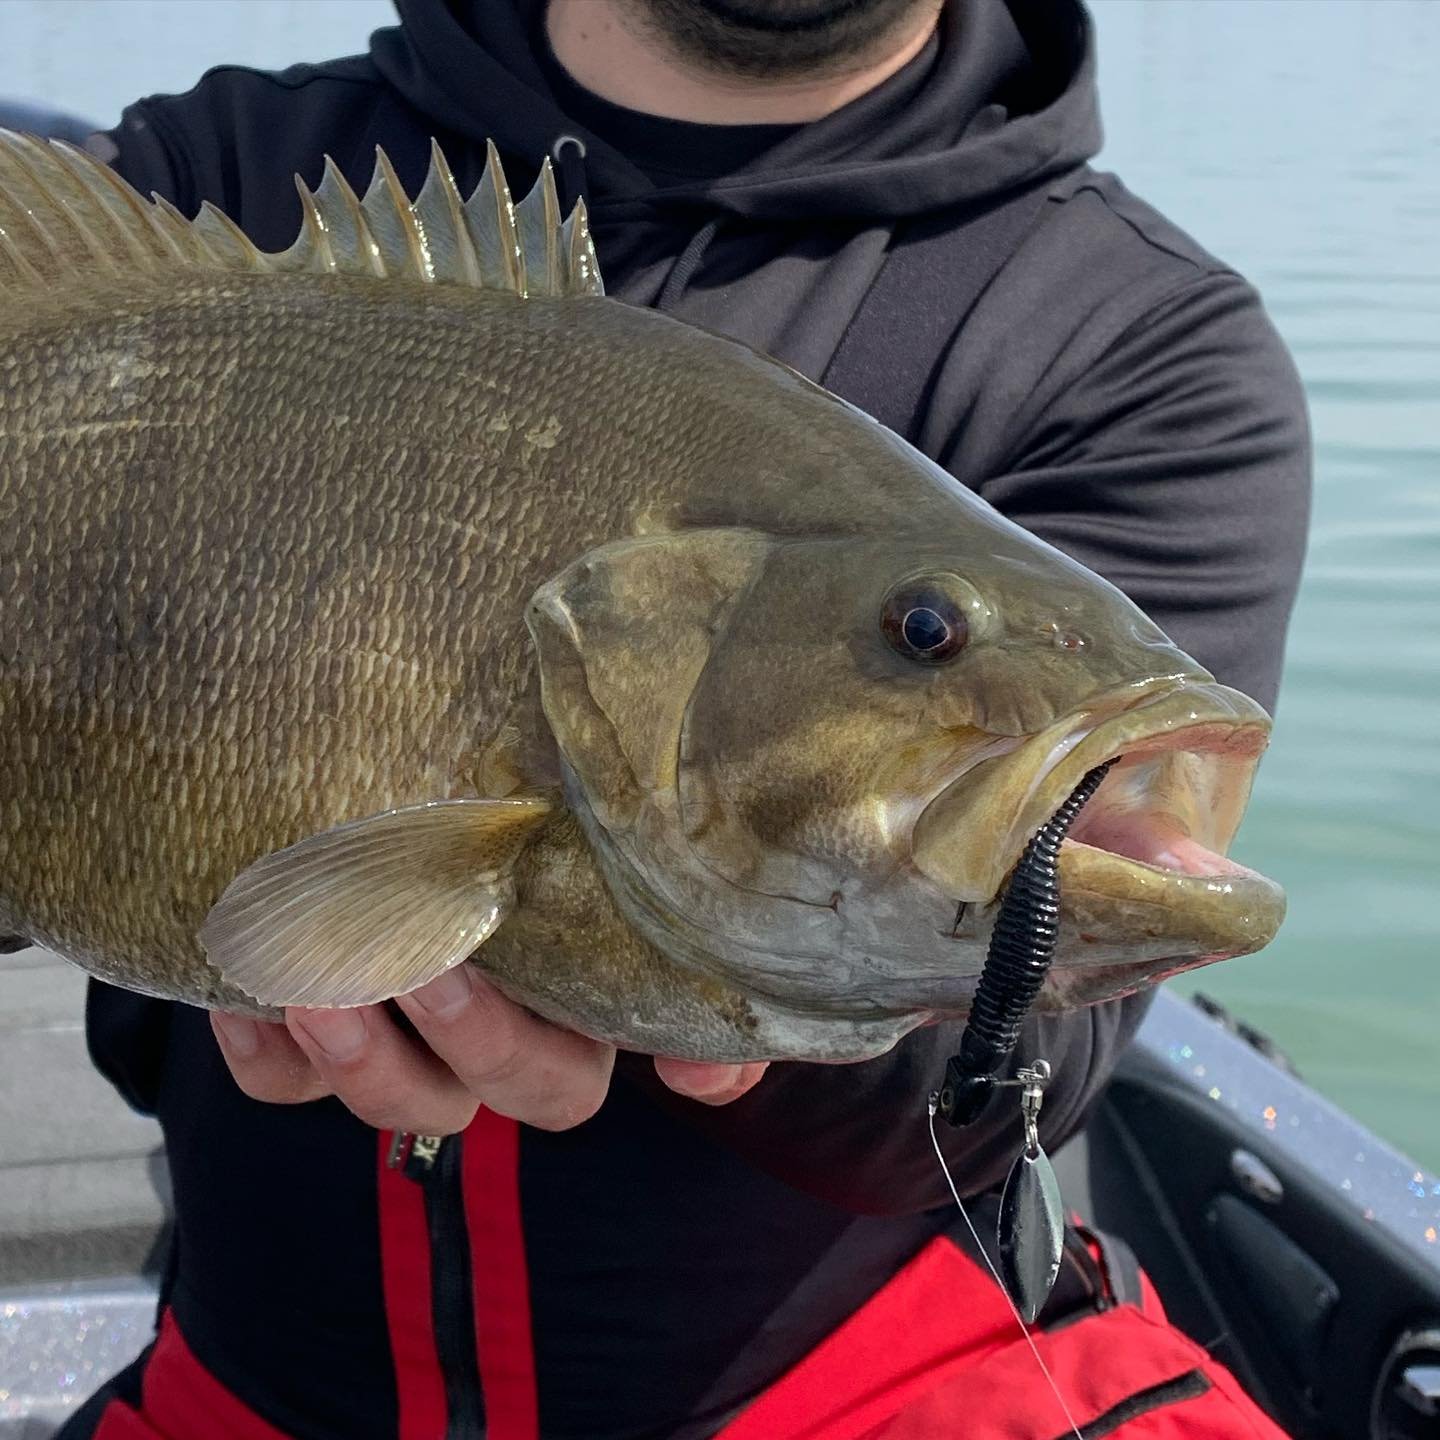 Pre-spawn season is now here in the north! Hard to beat a Sneaky Underspin with a Drop Minnow trailer in these colder water temps. Cast it way out and slow roll this bait as slow as you possibly can at this time of year while keeping it off bottom. 
